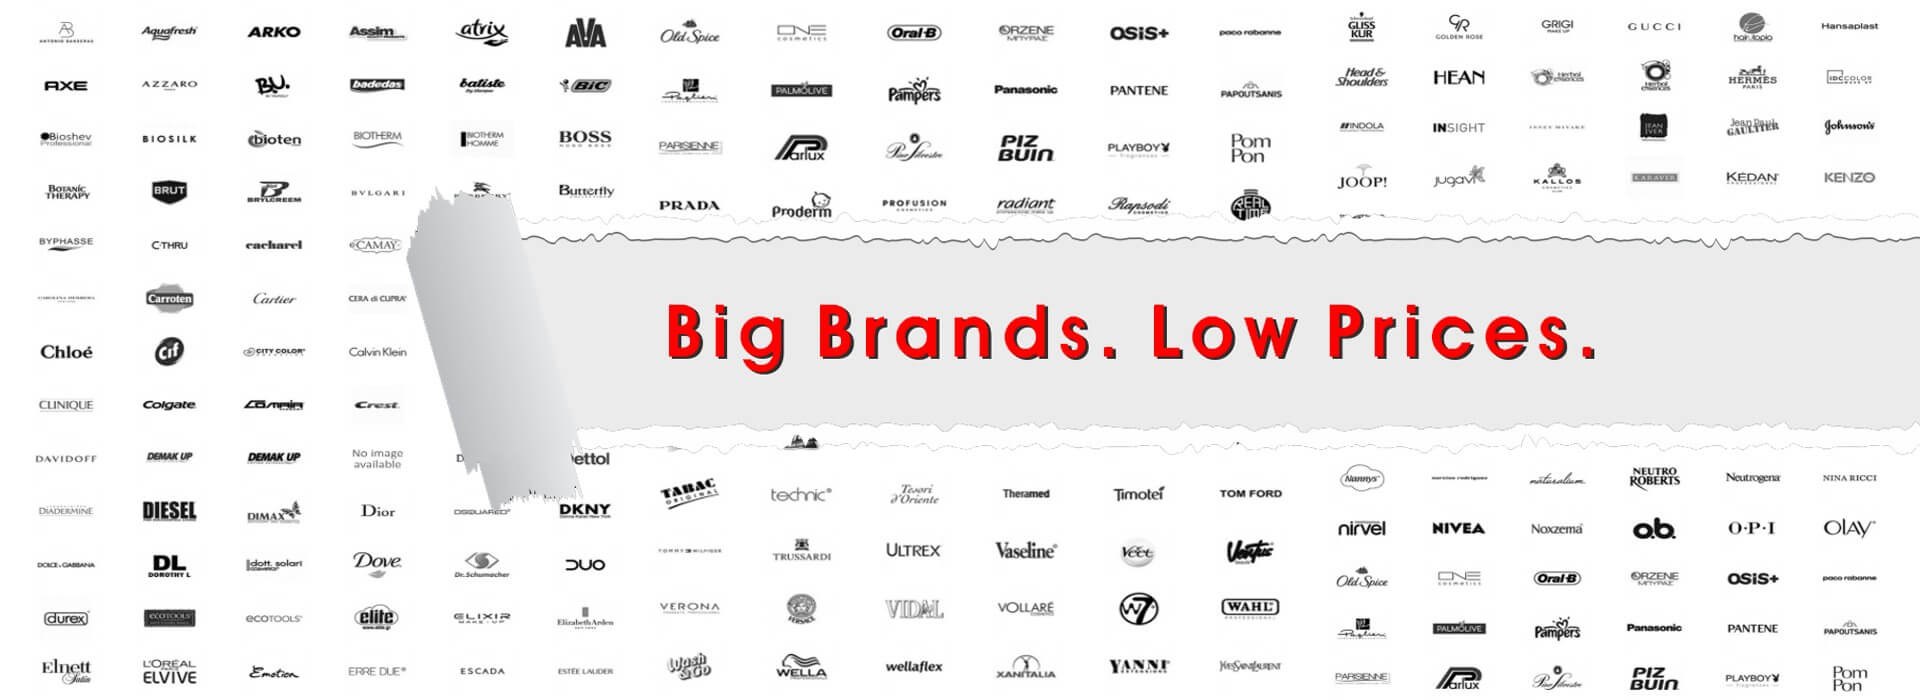 Big Brands Low Prices